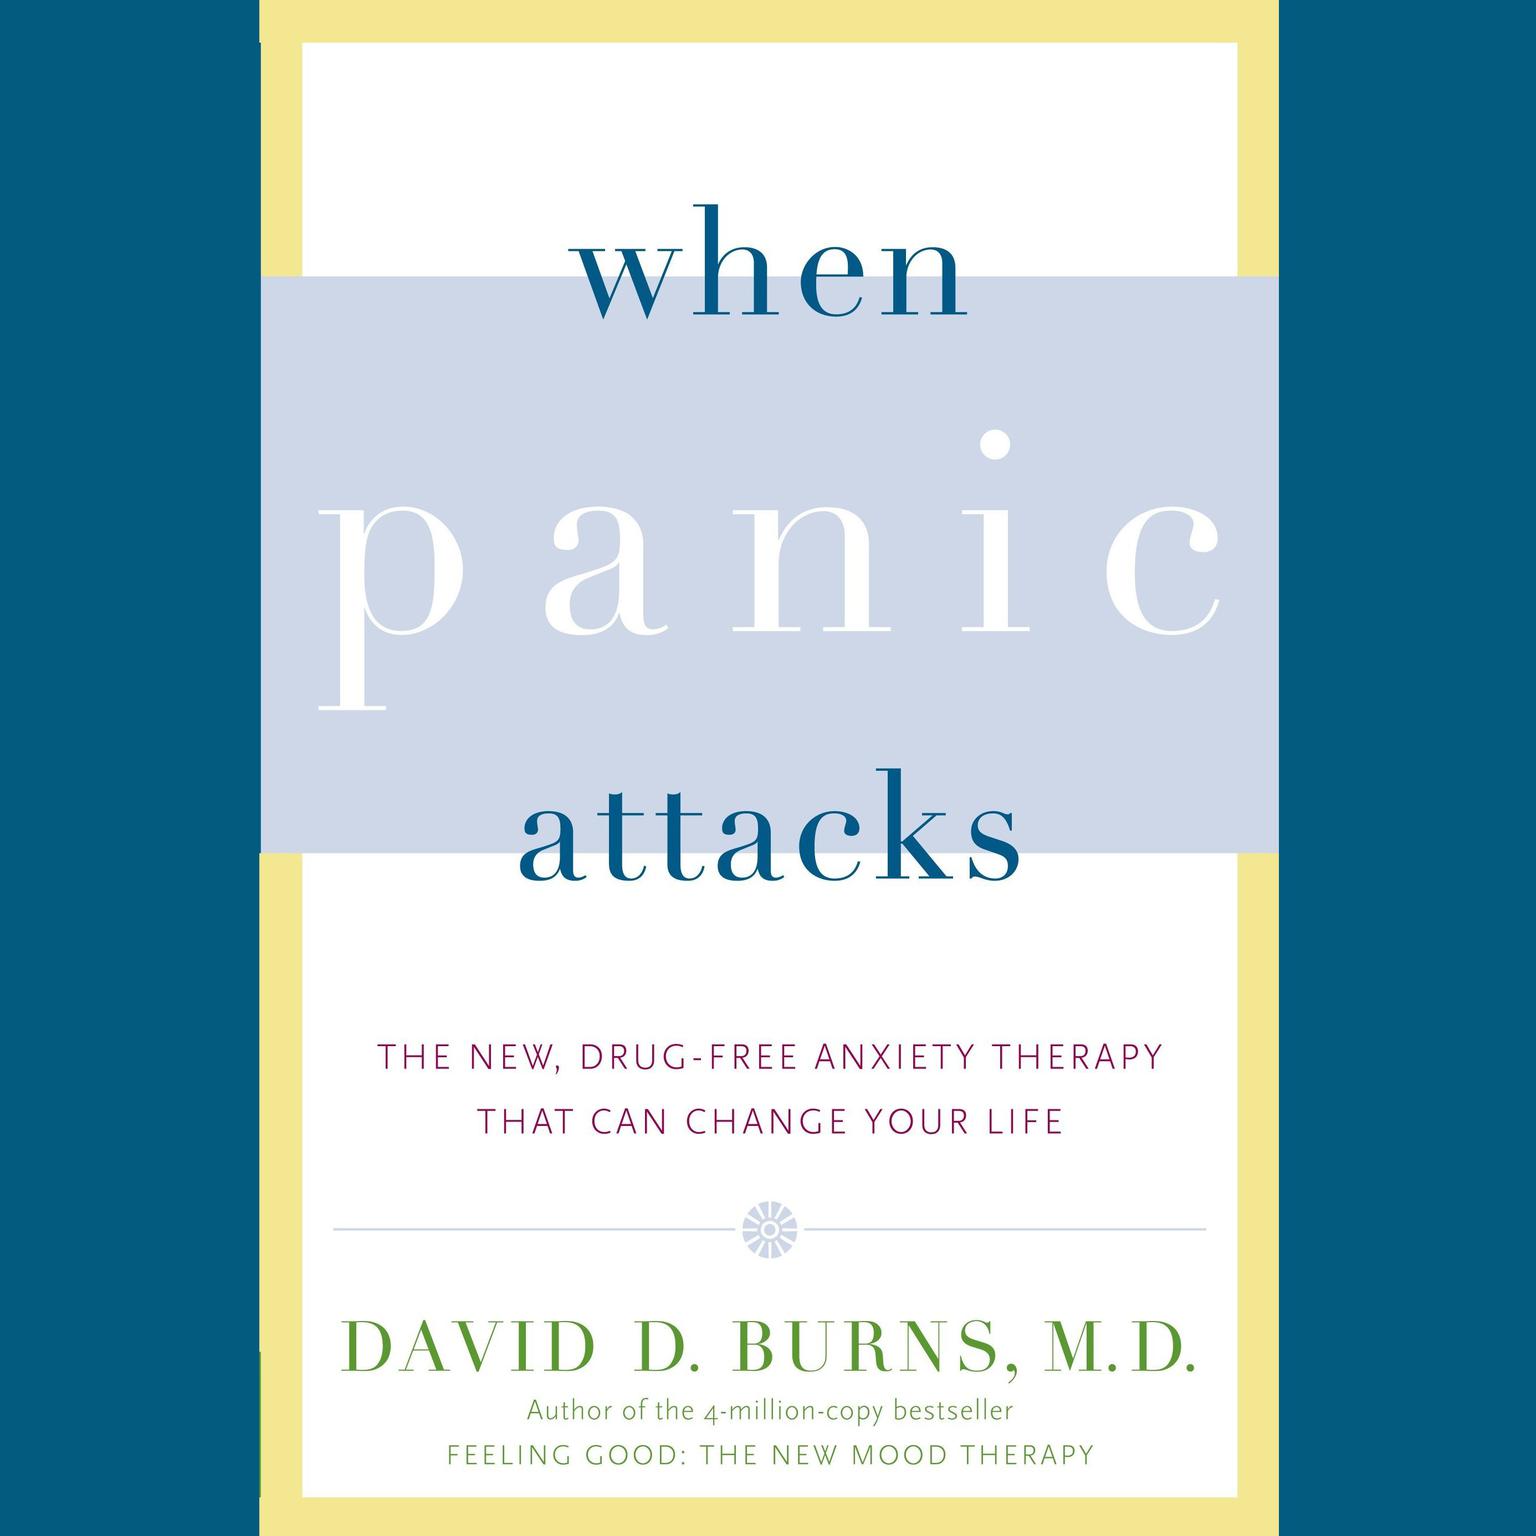 When Panic Attacks: The New, Drug-Free Anxiety Therapy That Can Change Your Life Audiobook, by David D. Burns